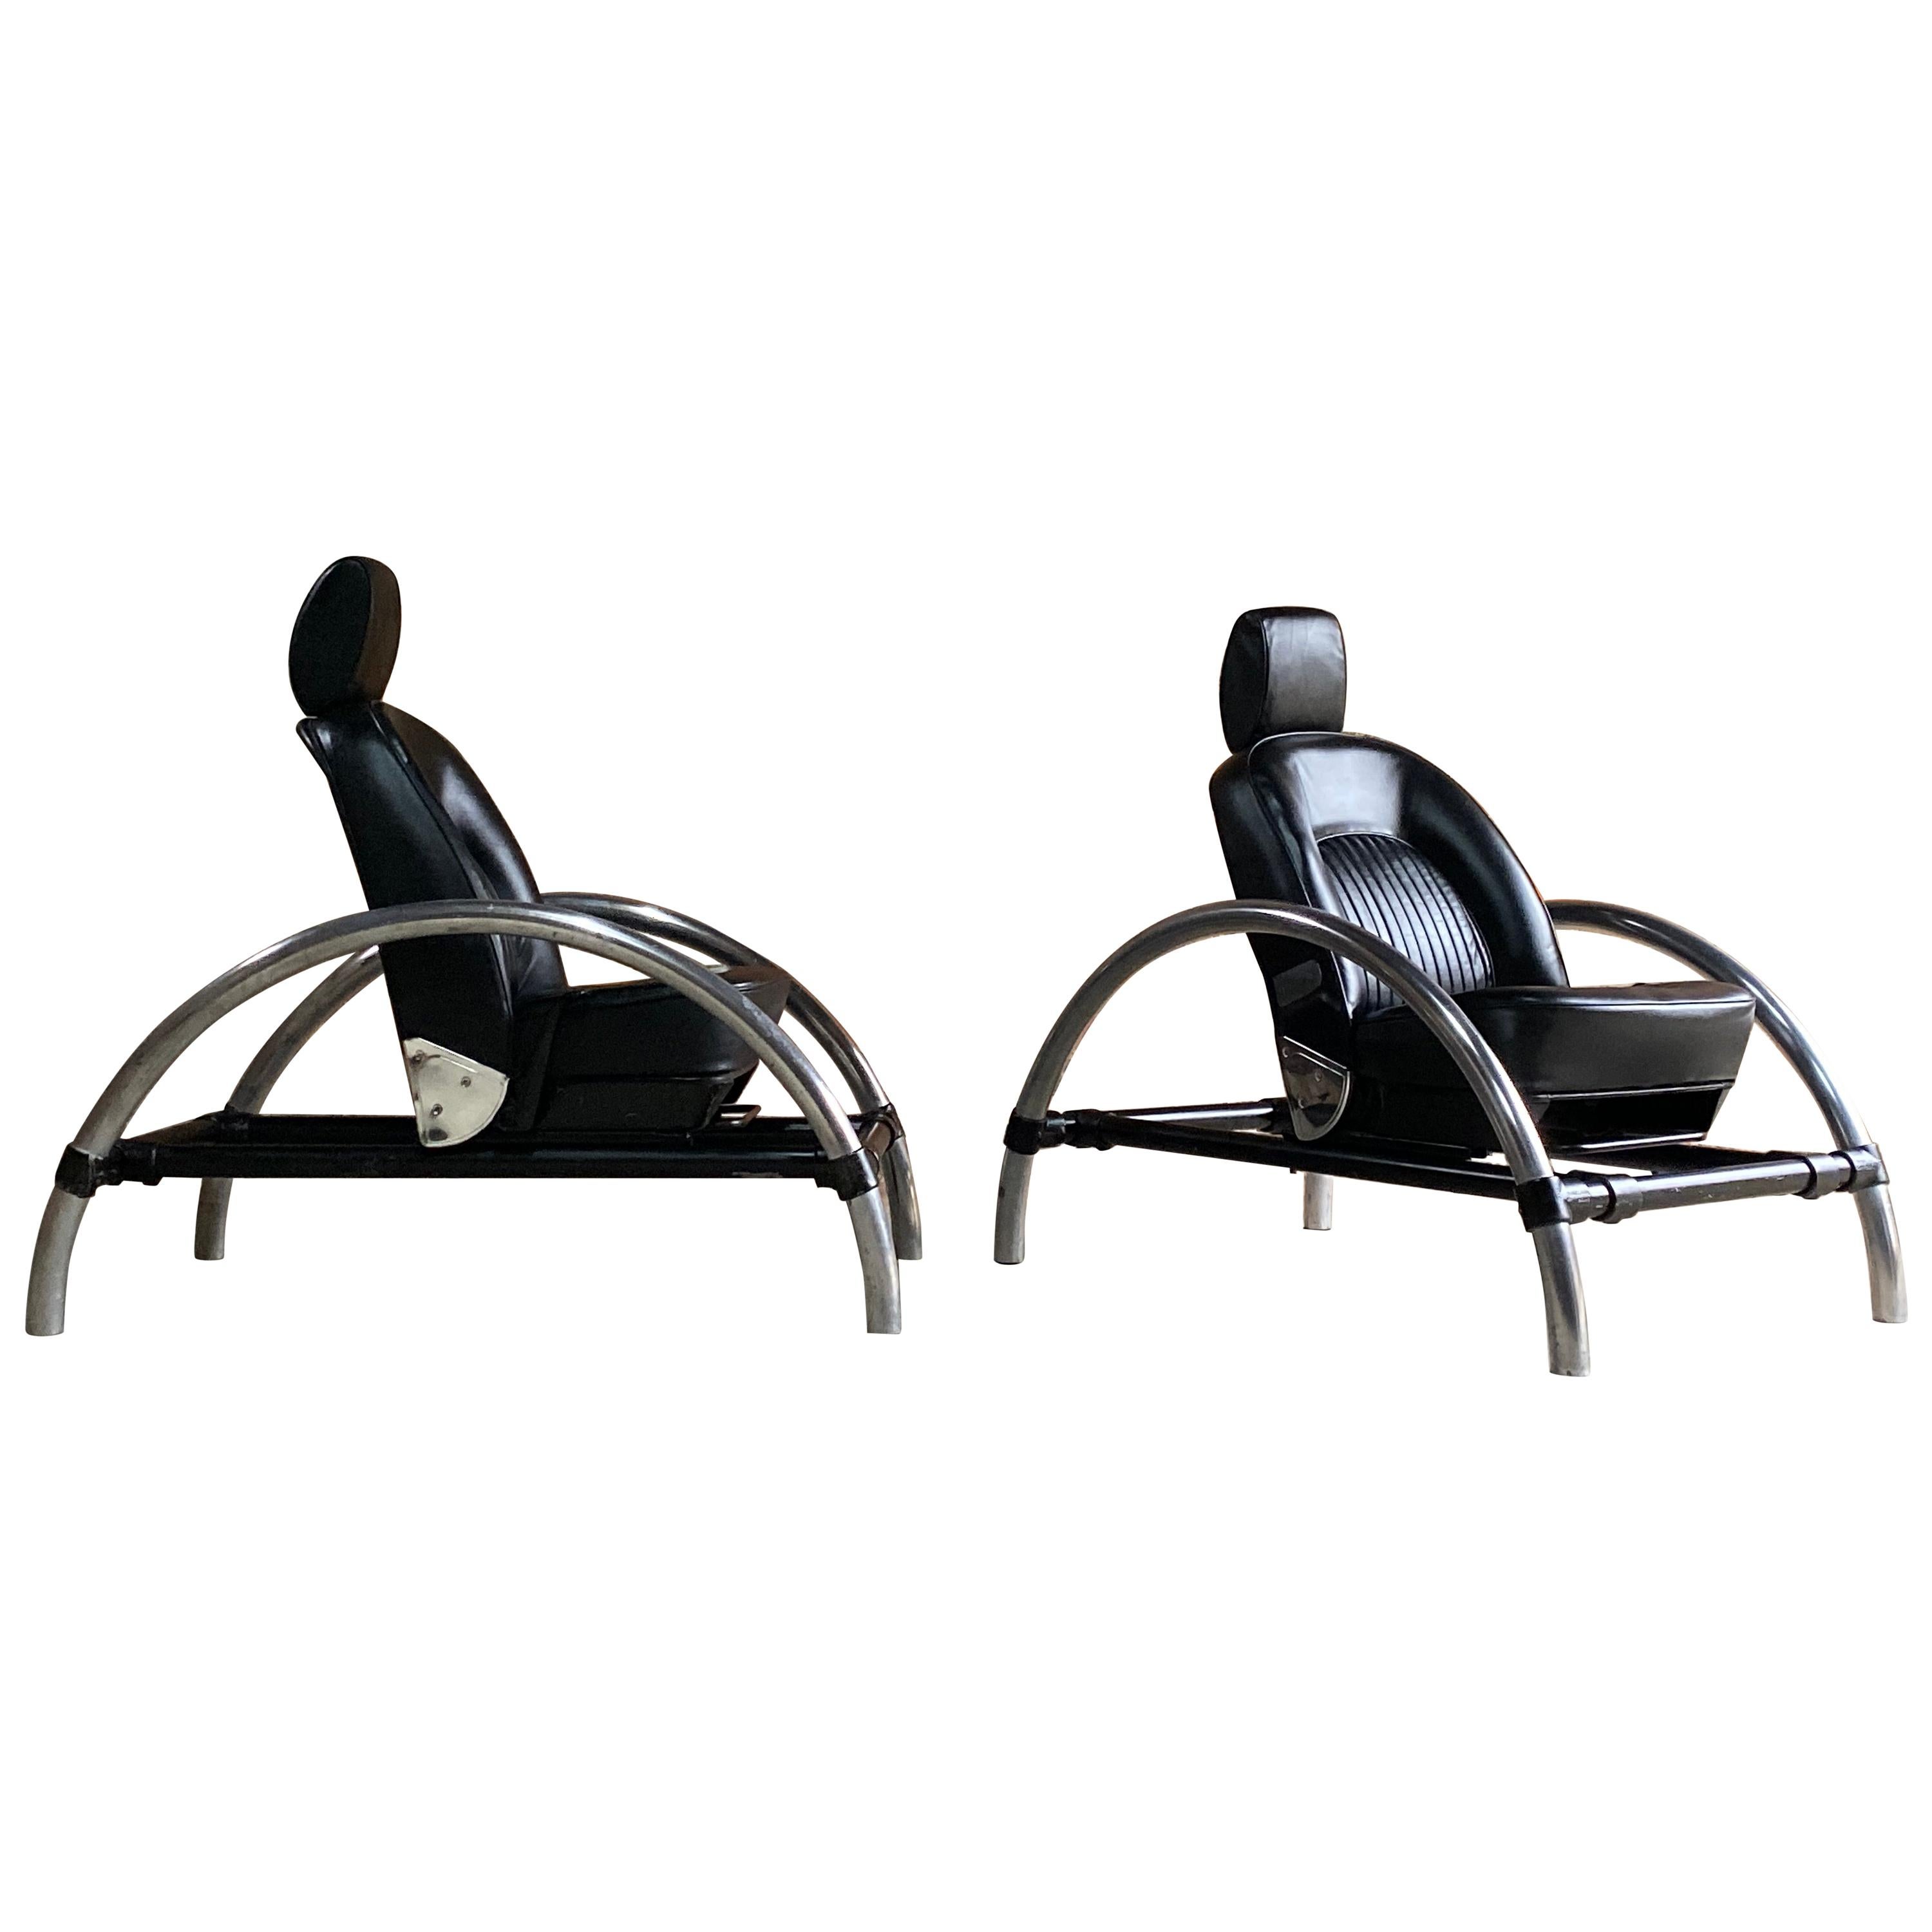 Ron Arad Rover Chairs Pair by One Off Ltd, circa 1981